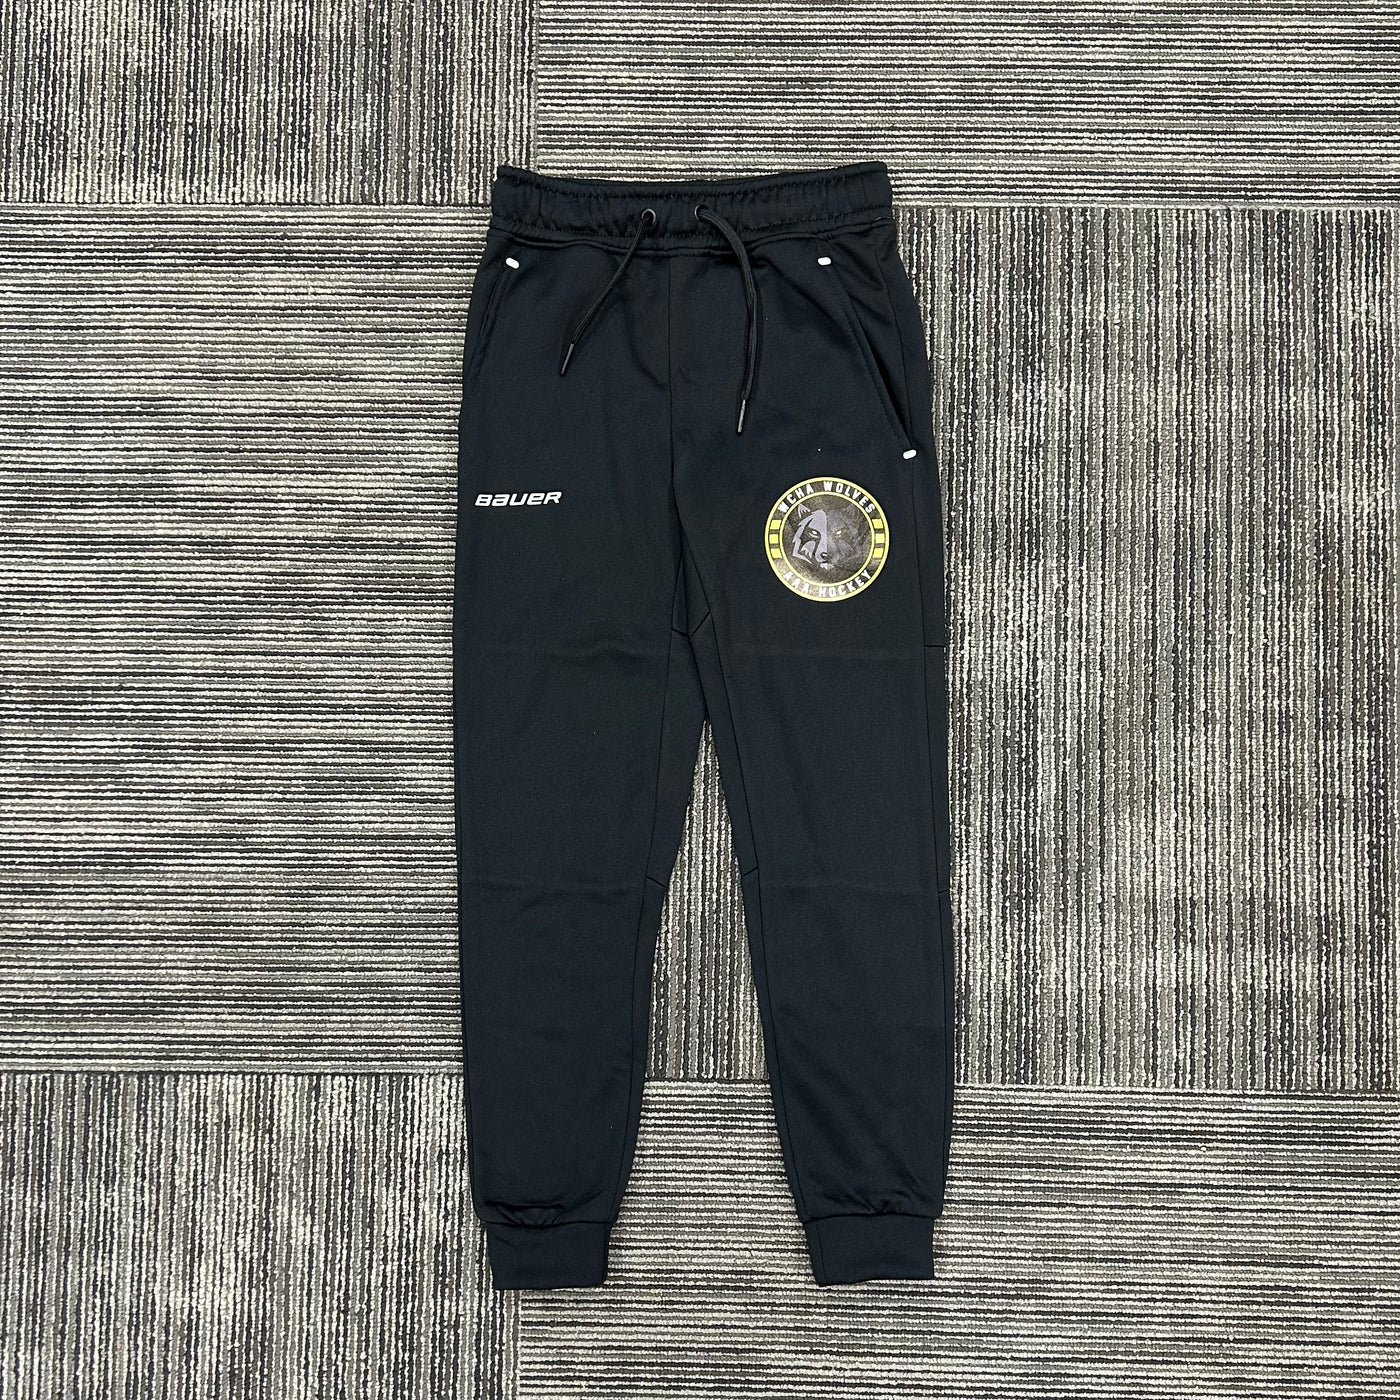 AAA Spring Team Bauer Joggers - Youth